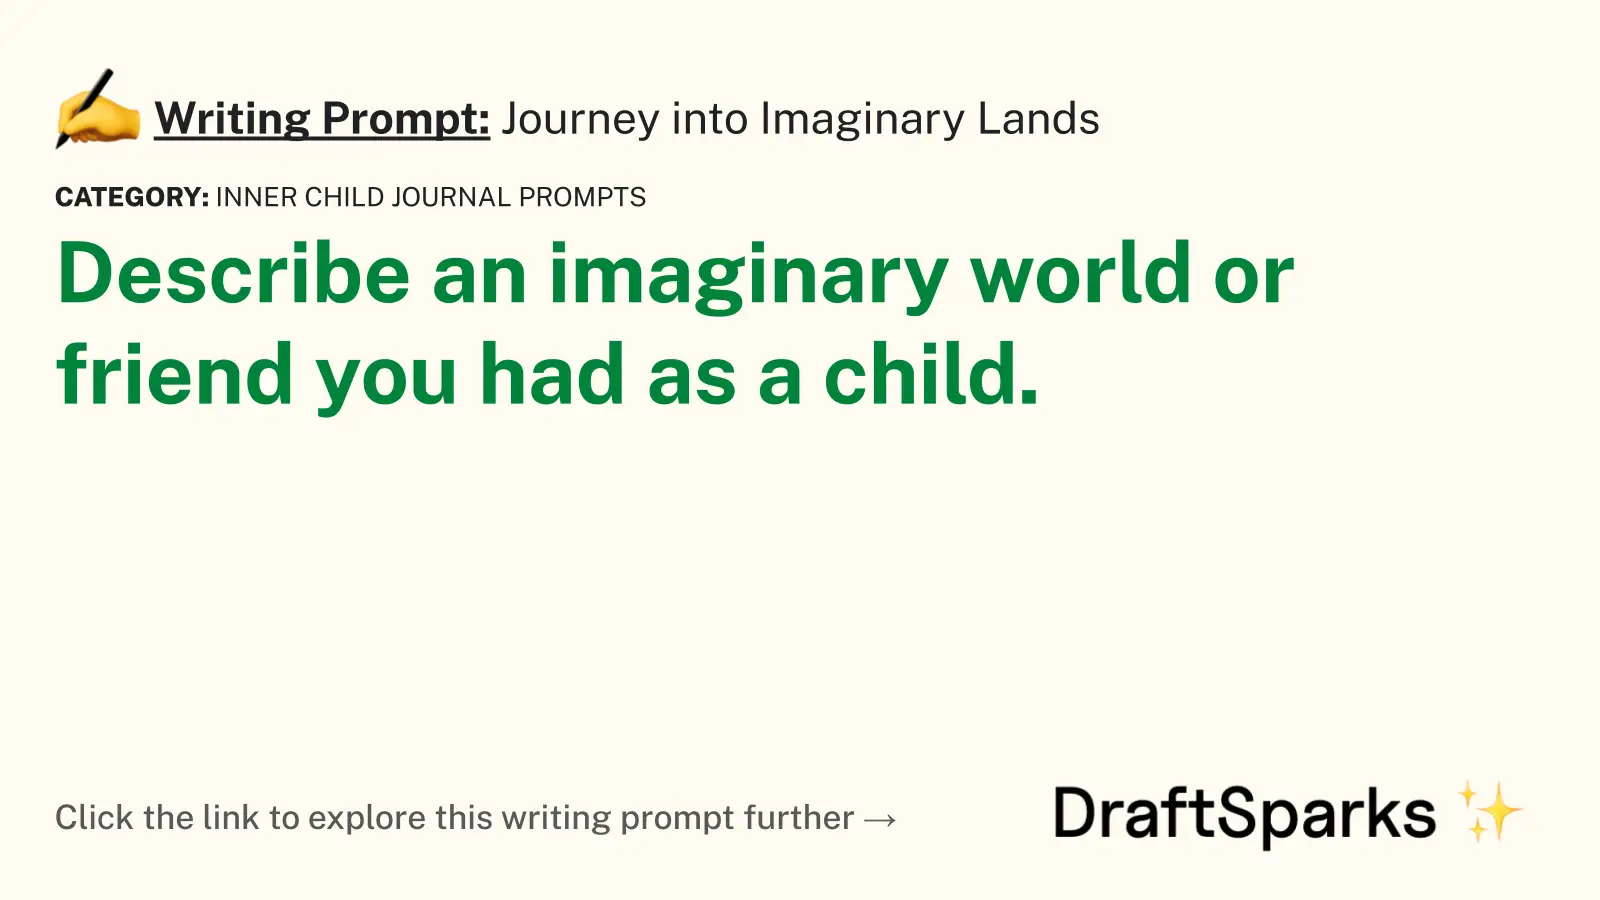 Journey into Imaginary Lands